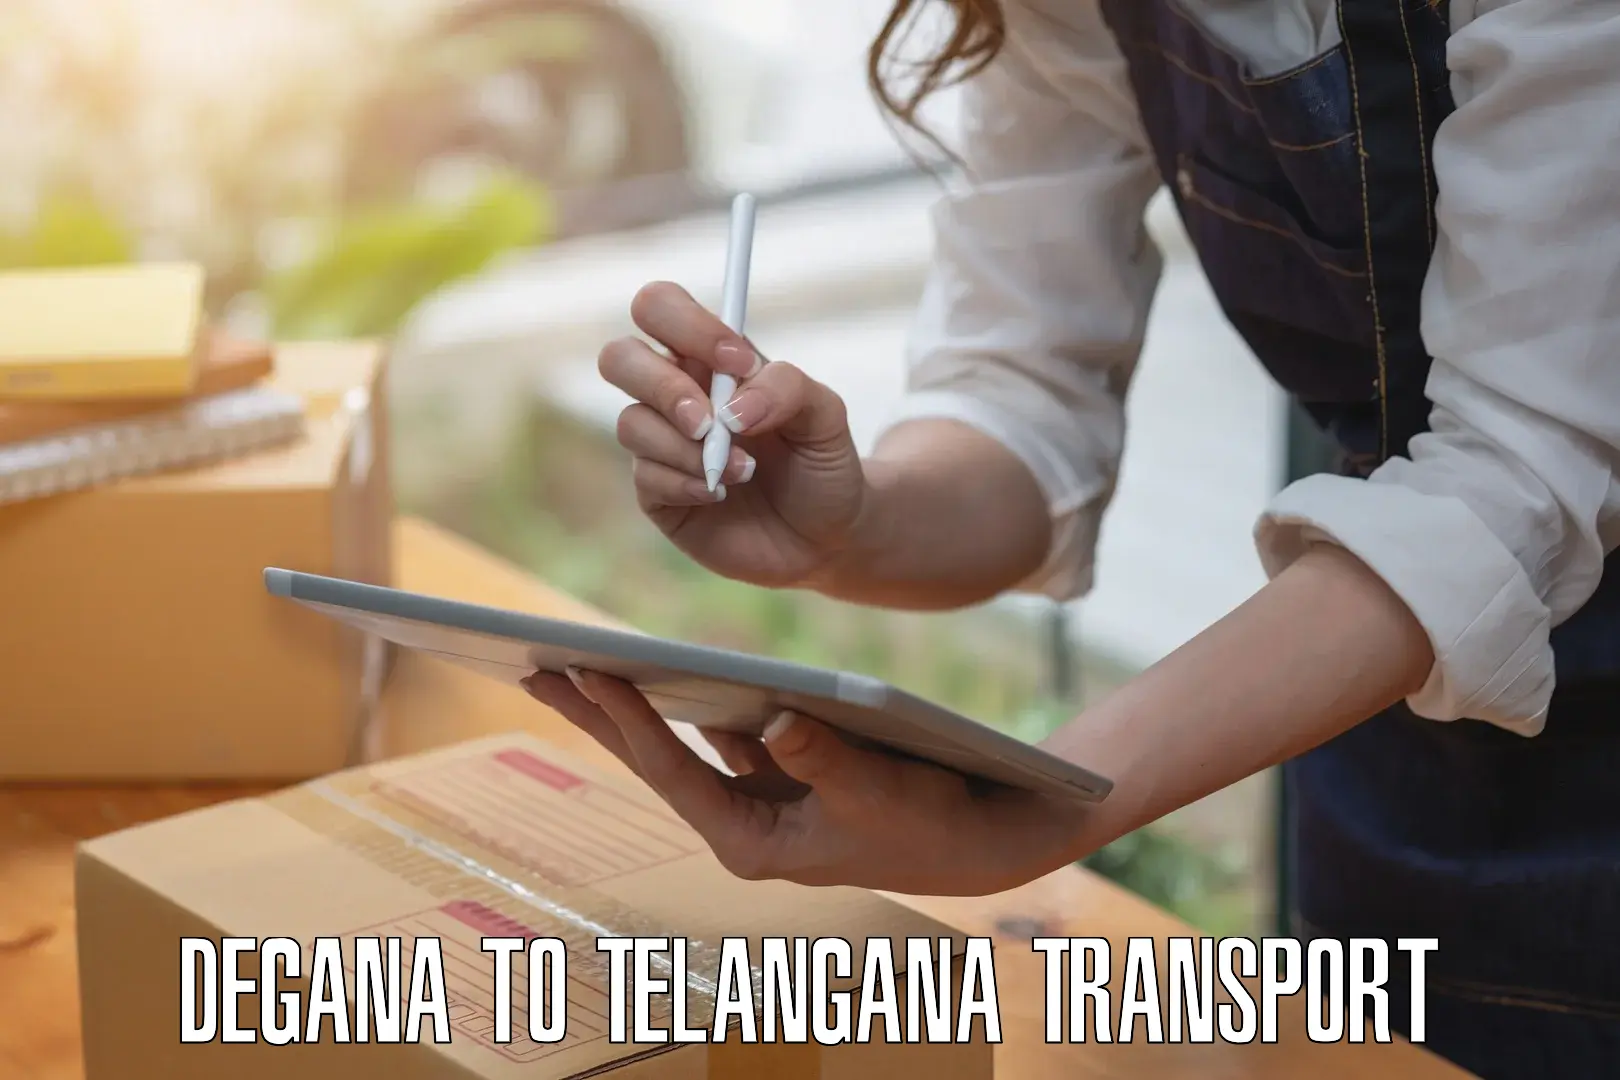 Transport bike from one state to another Degana to Tallada